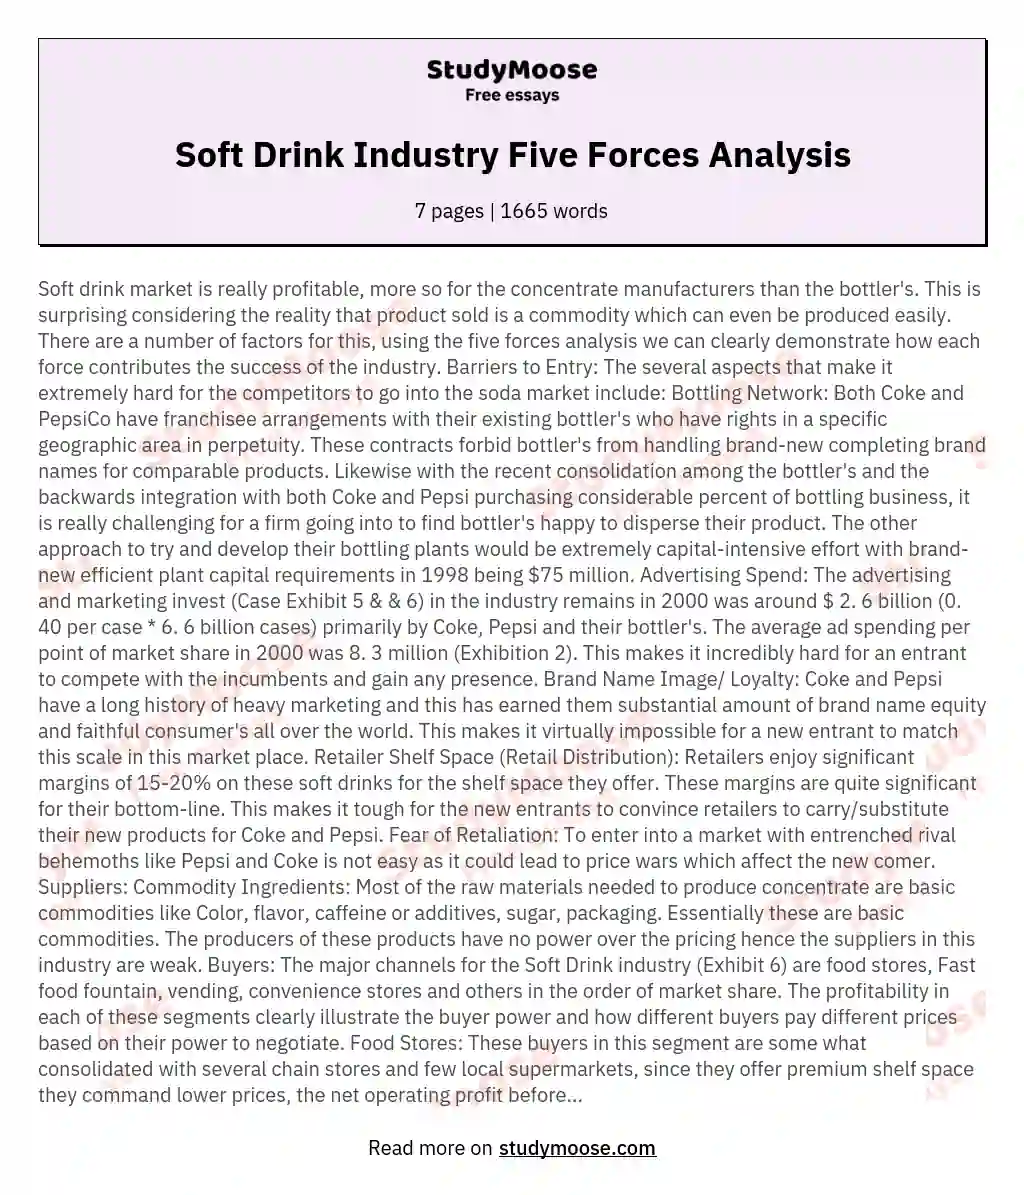 Soft Drink Industry Five Forces Analysis essay